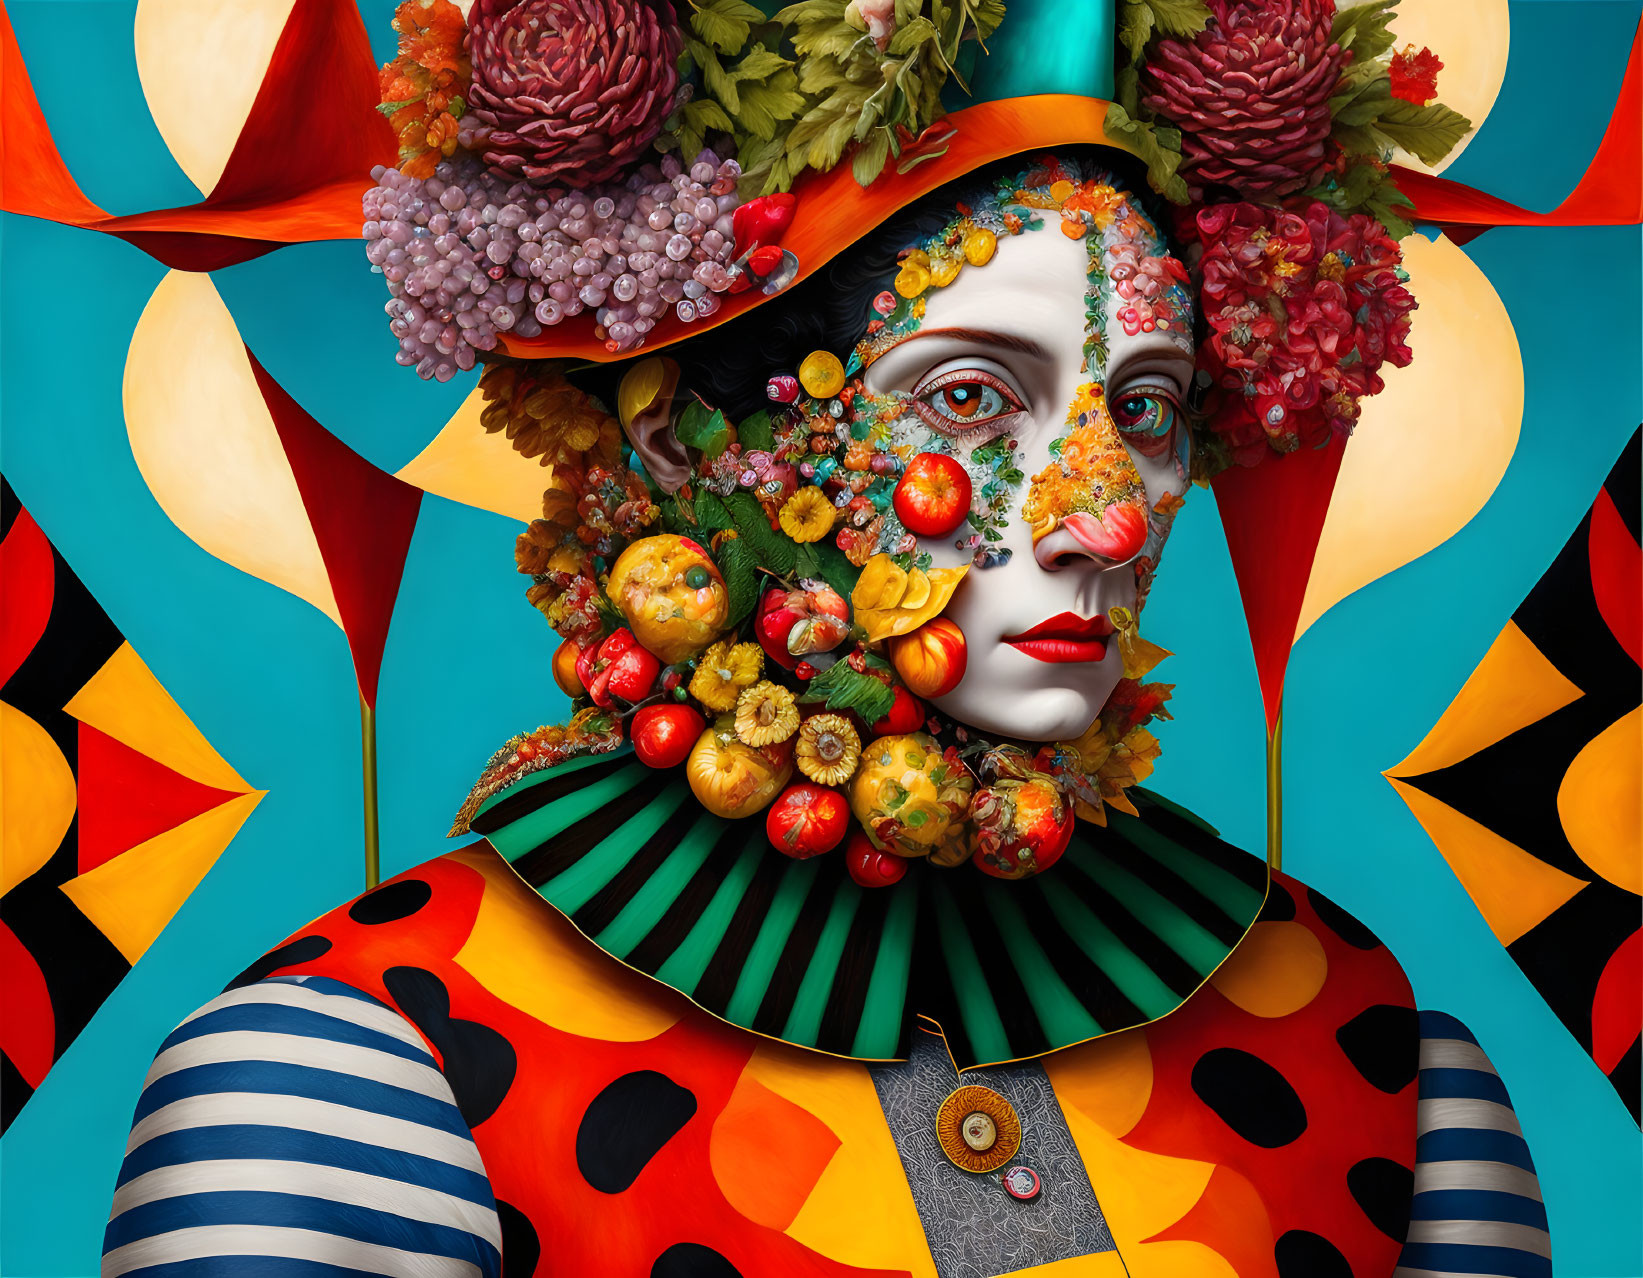 Colorful Portrait of Person with Floral and Fruit Makeup on Vibrant Geometric Background